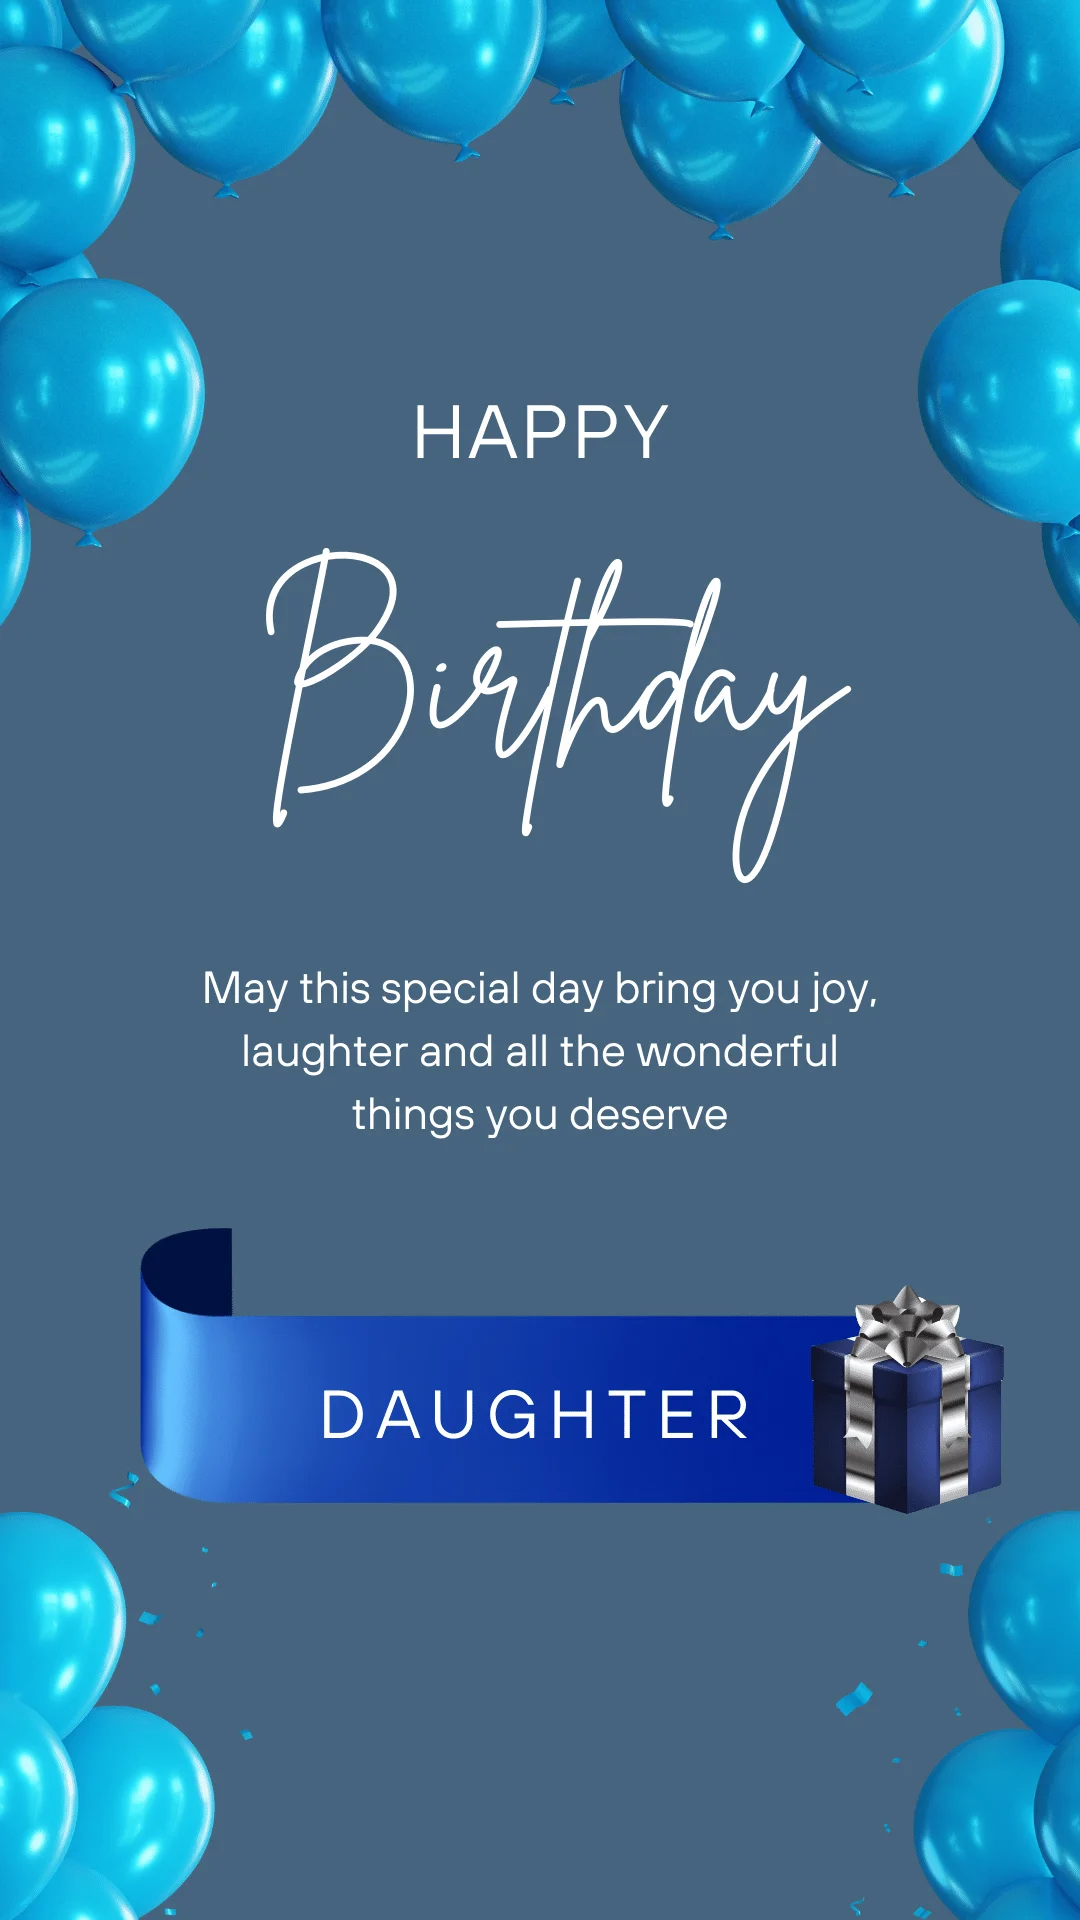 Blue-White-Simple-Happy-Birthday-Card-for-Daughter